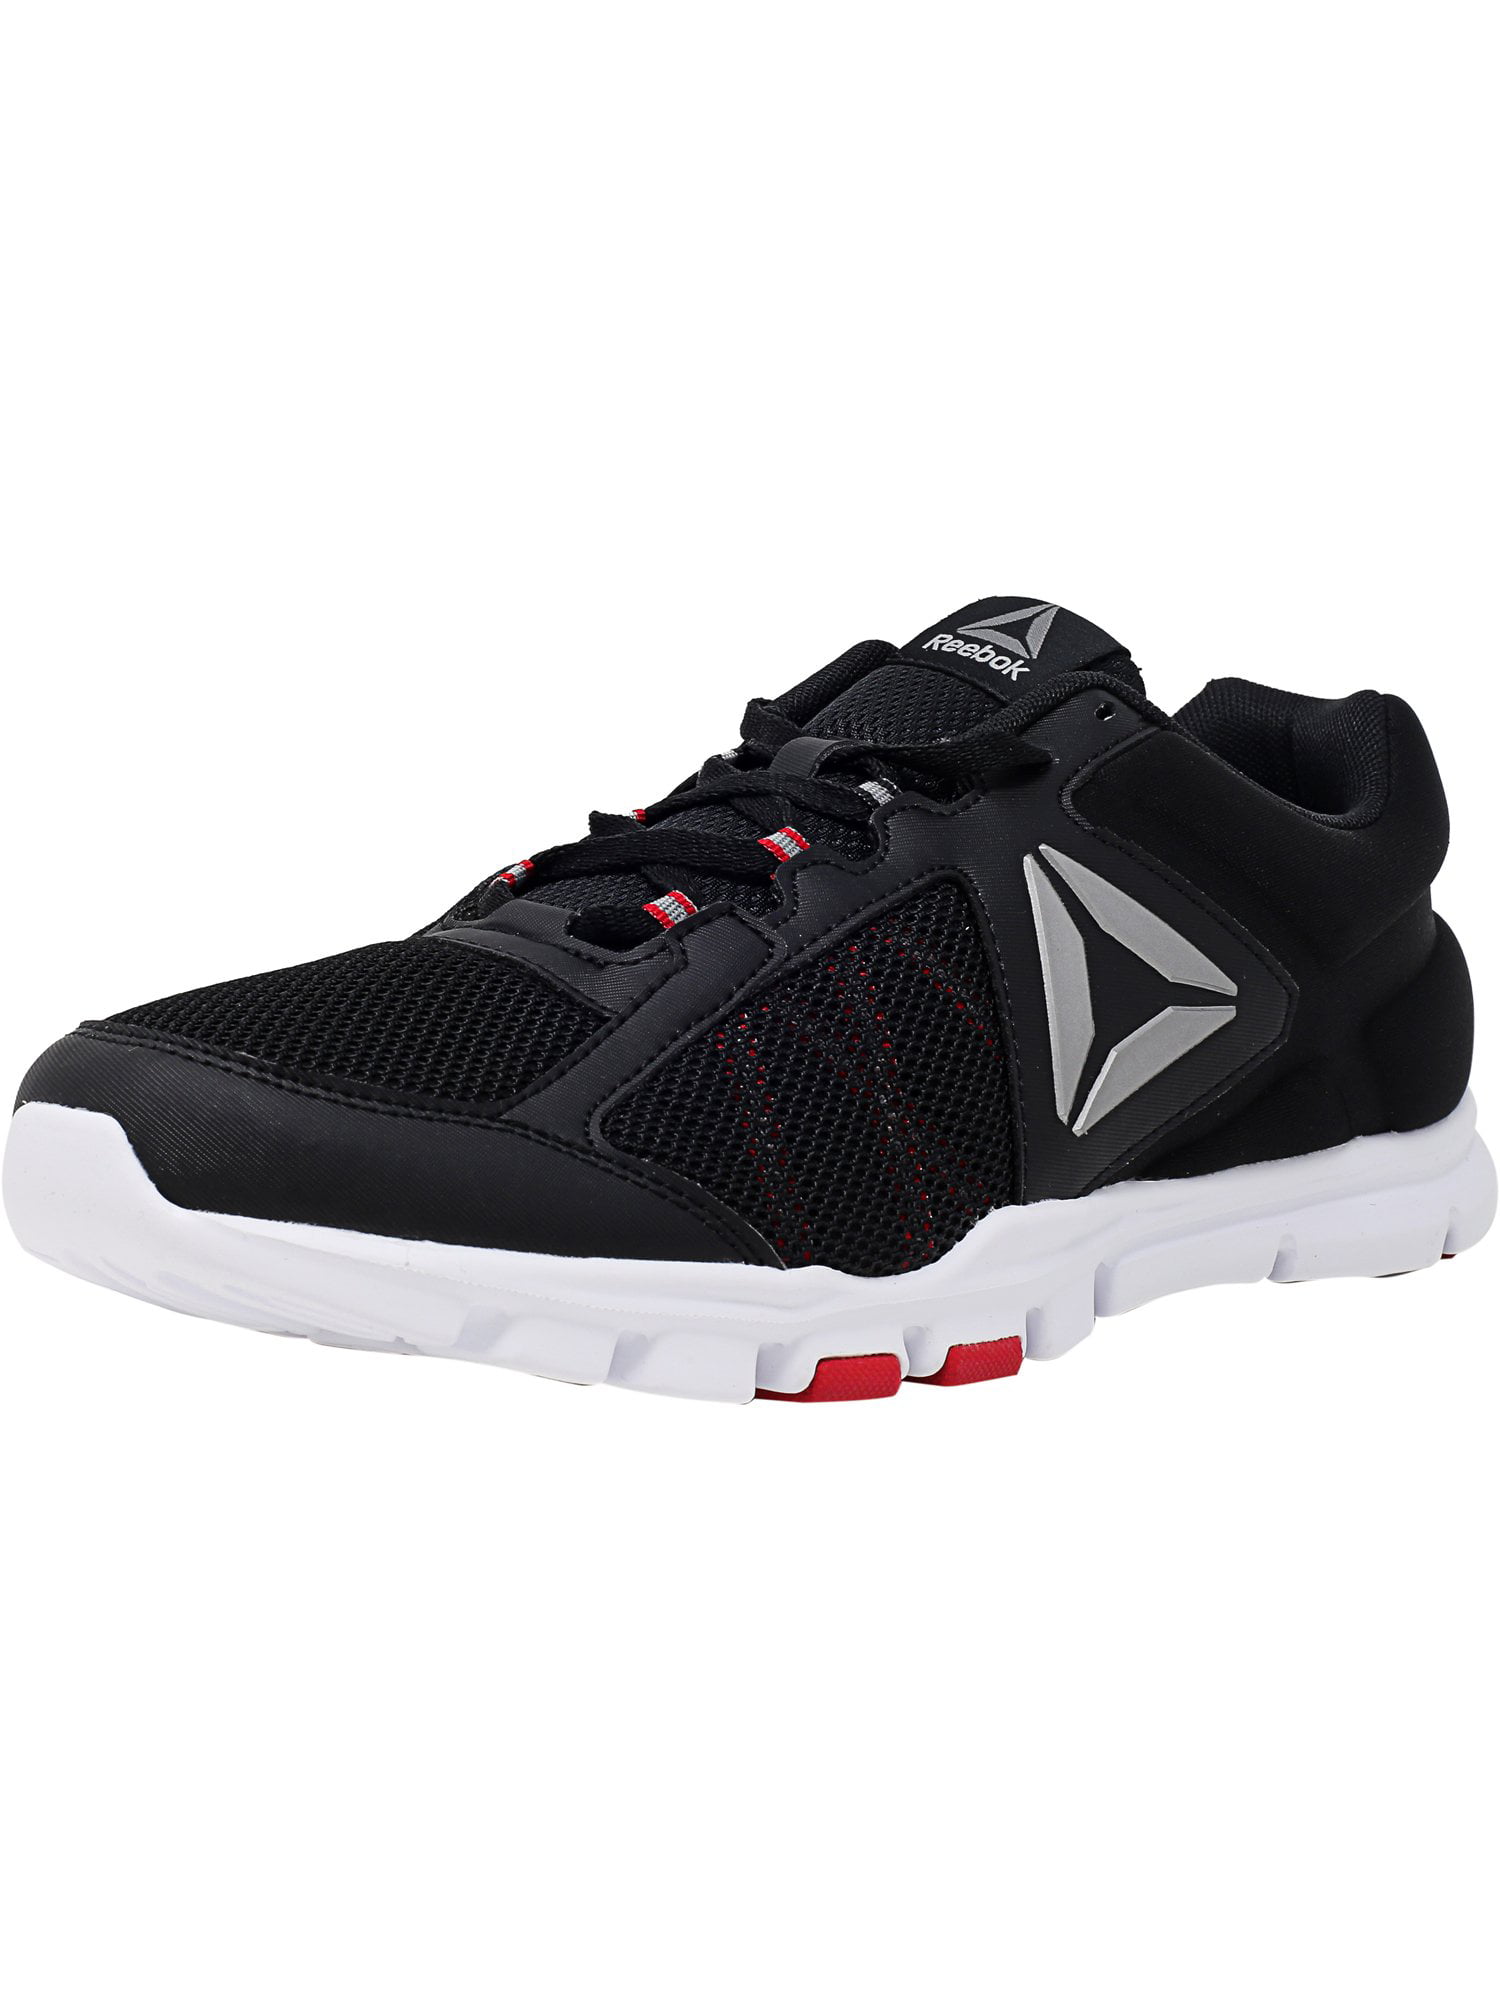 New Mens Reebok Yourflex Train 9.0 MT Athletic Shoes Black Red White Gray 10.5 